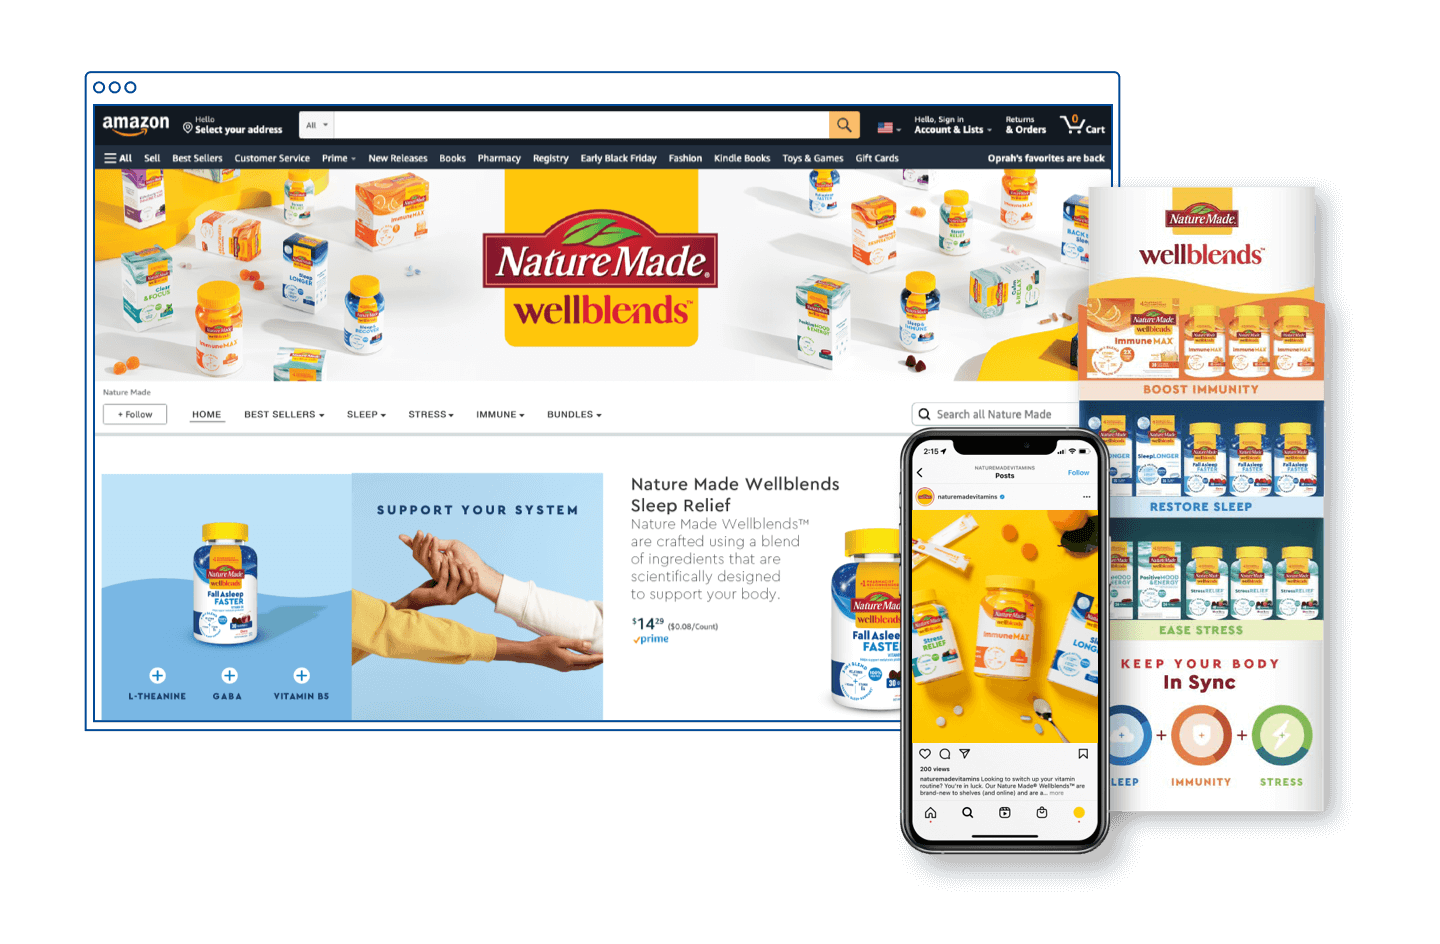 brand positioning for wellblends